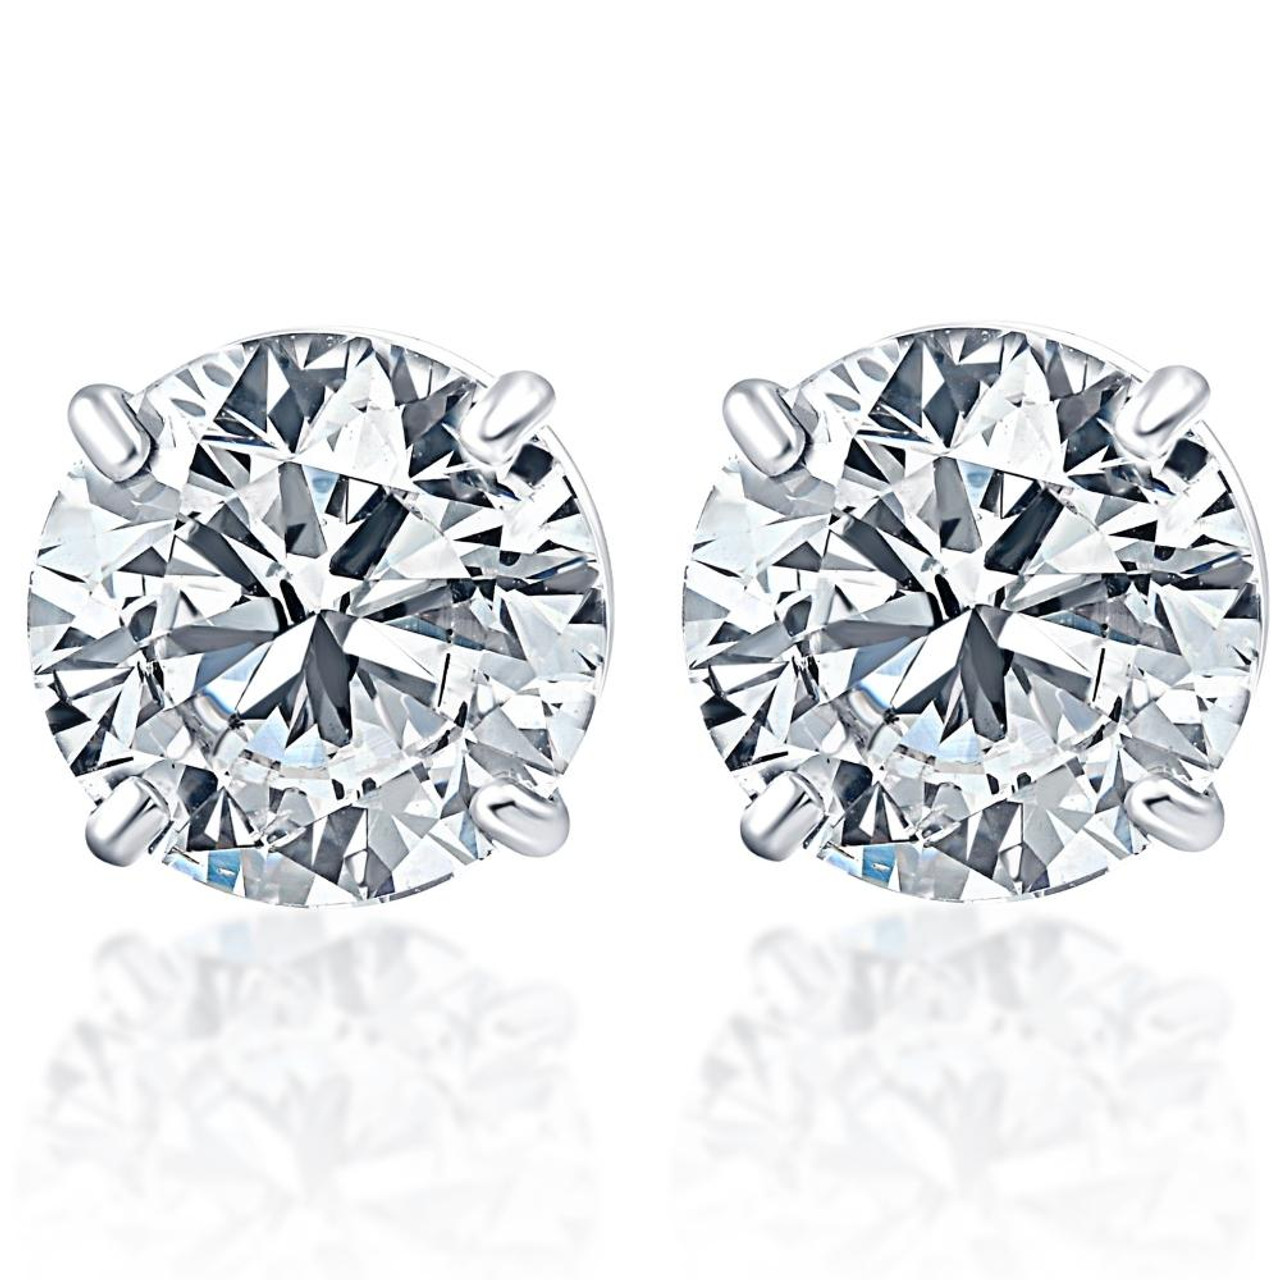 Cluster earrings with 175 carat diamonds in white gold  BAUNAT